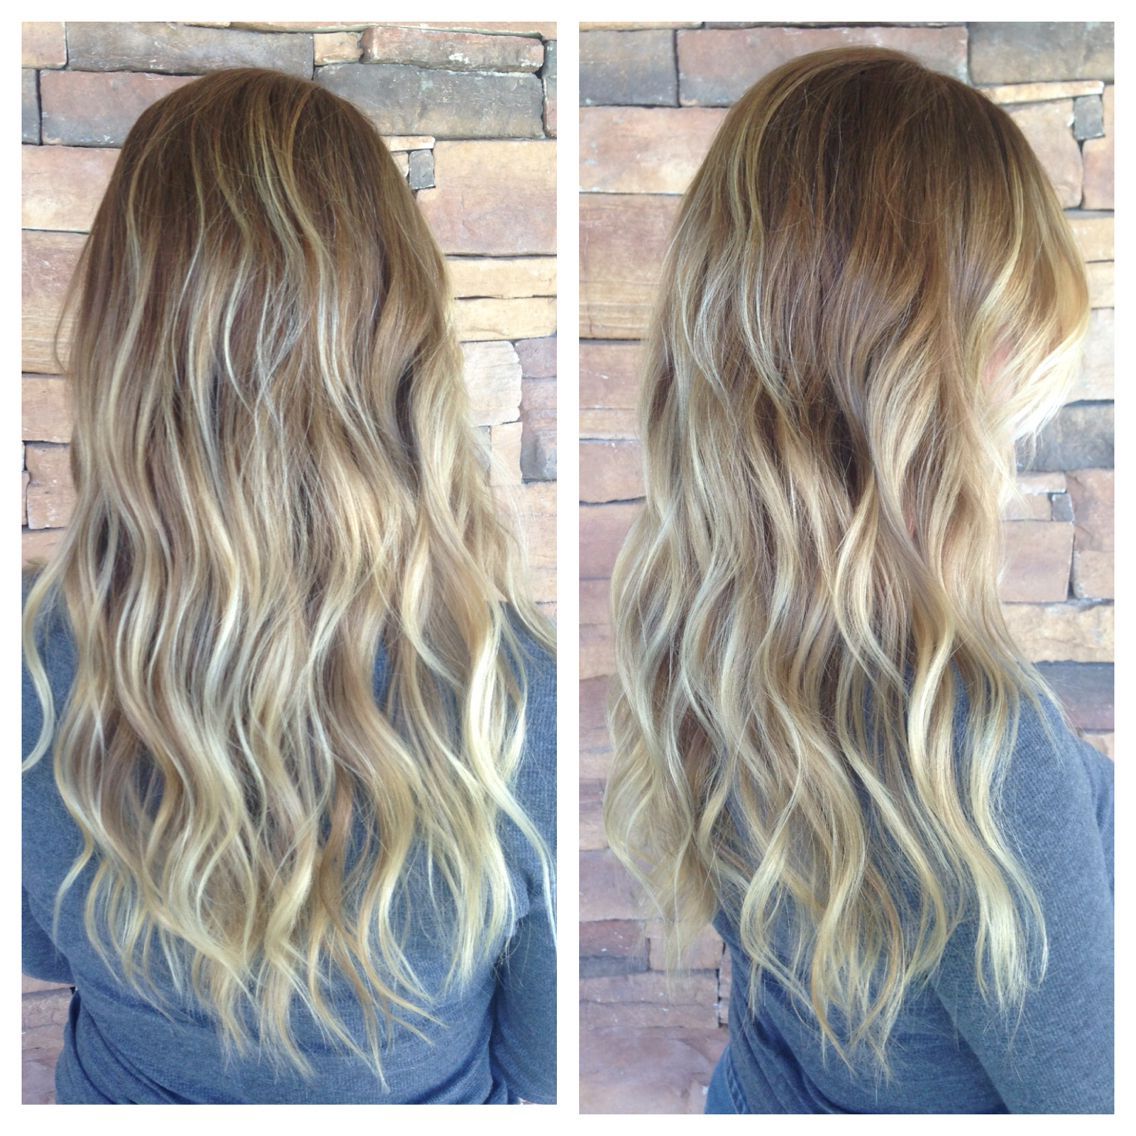 Buttery Warm Blonde Ombré With Light Blonde Balayage On Within Warm Blonde Balayage Hairstyles (View 12 of 20)